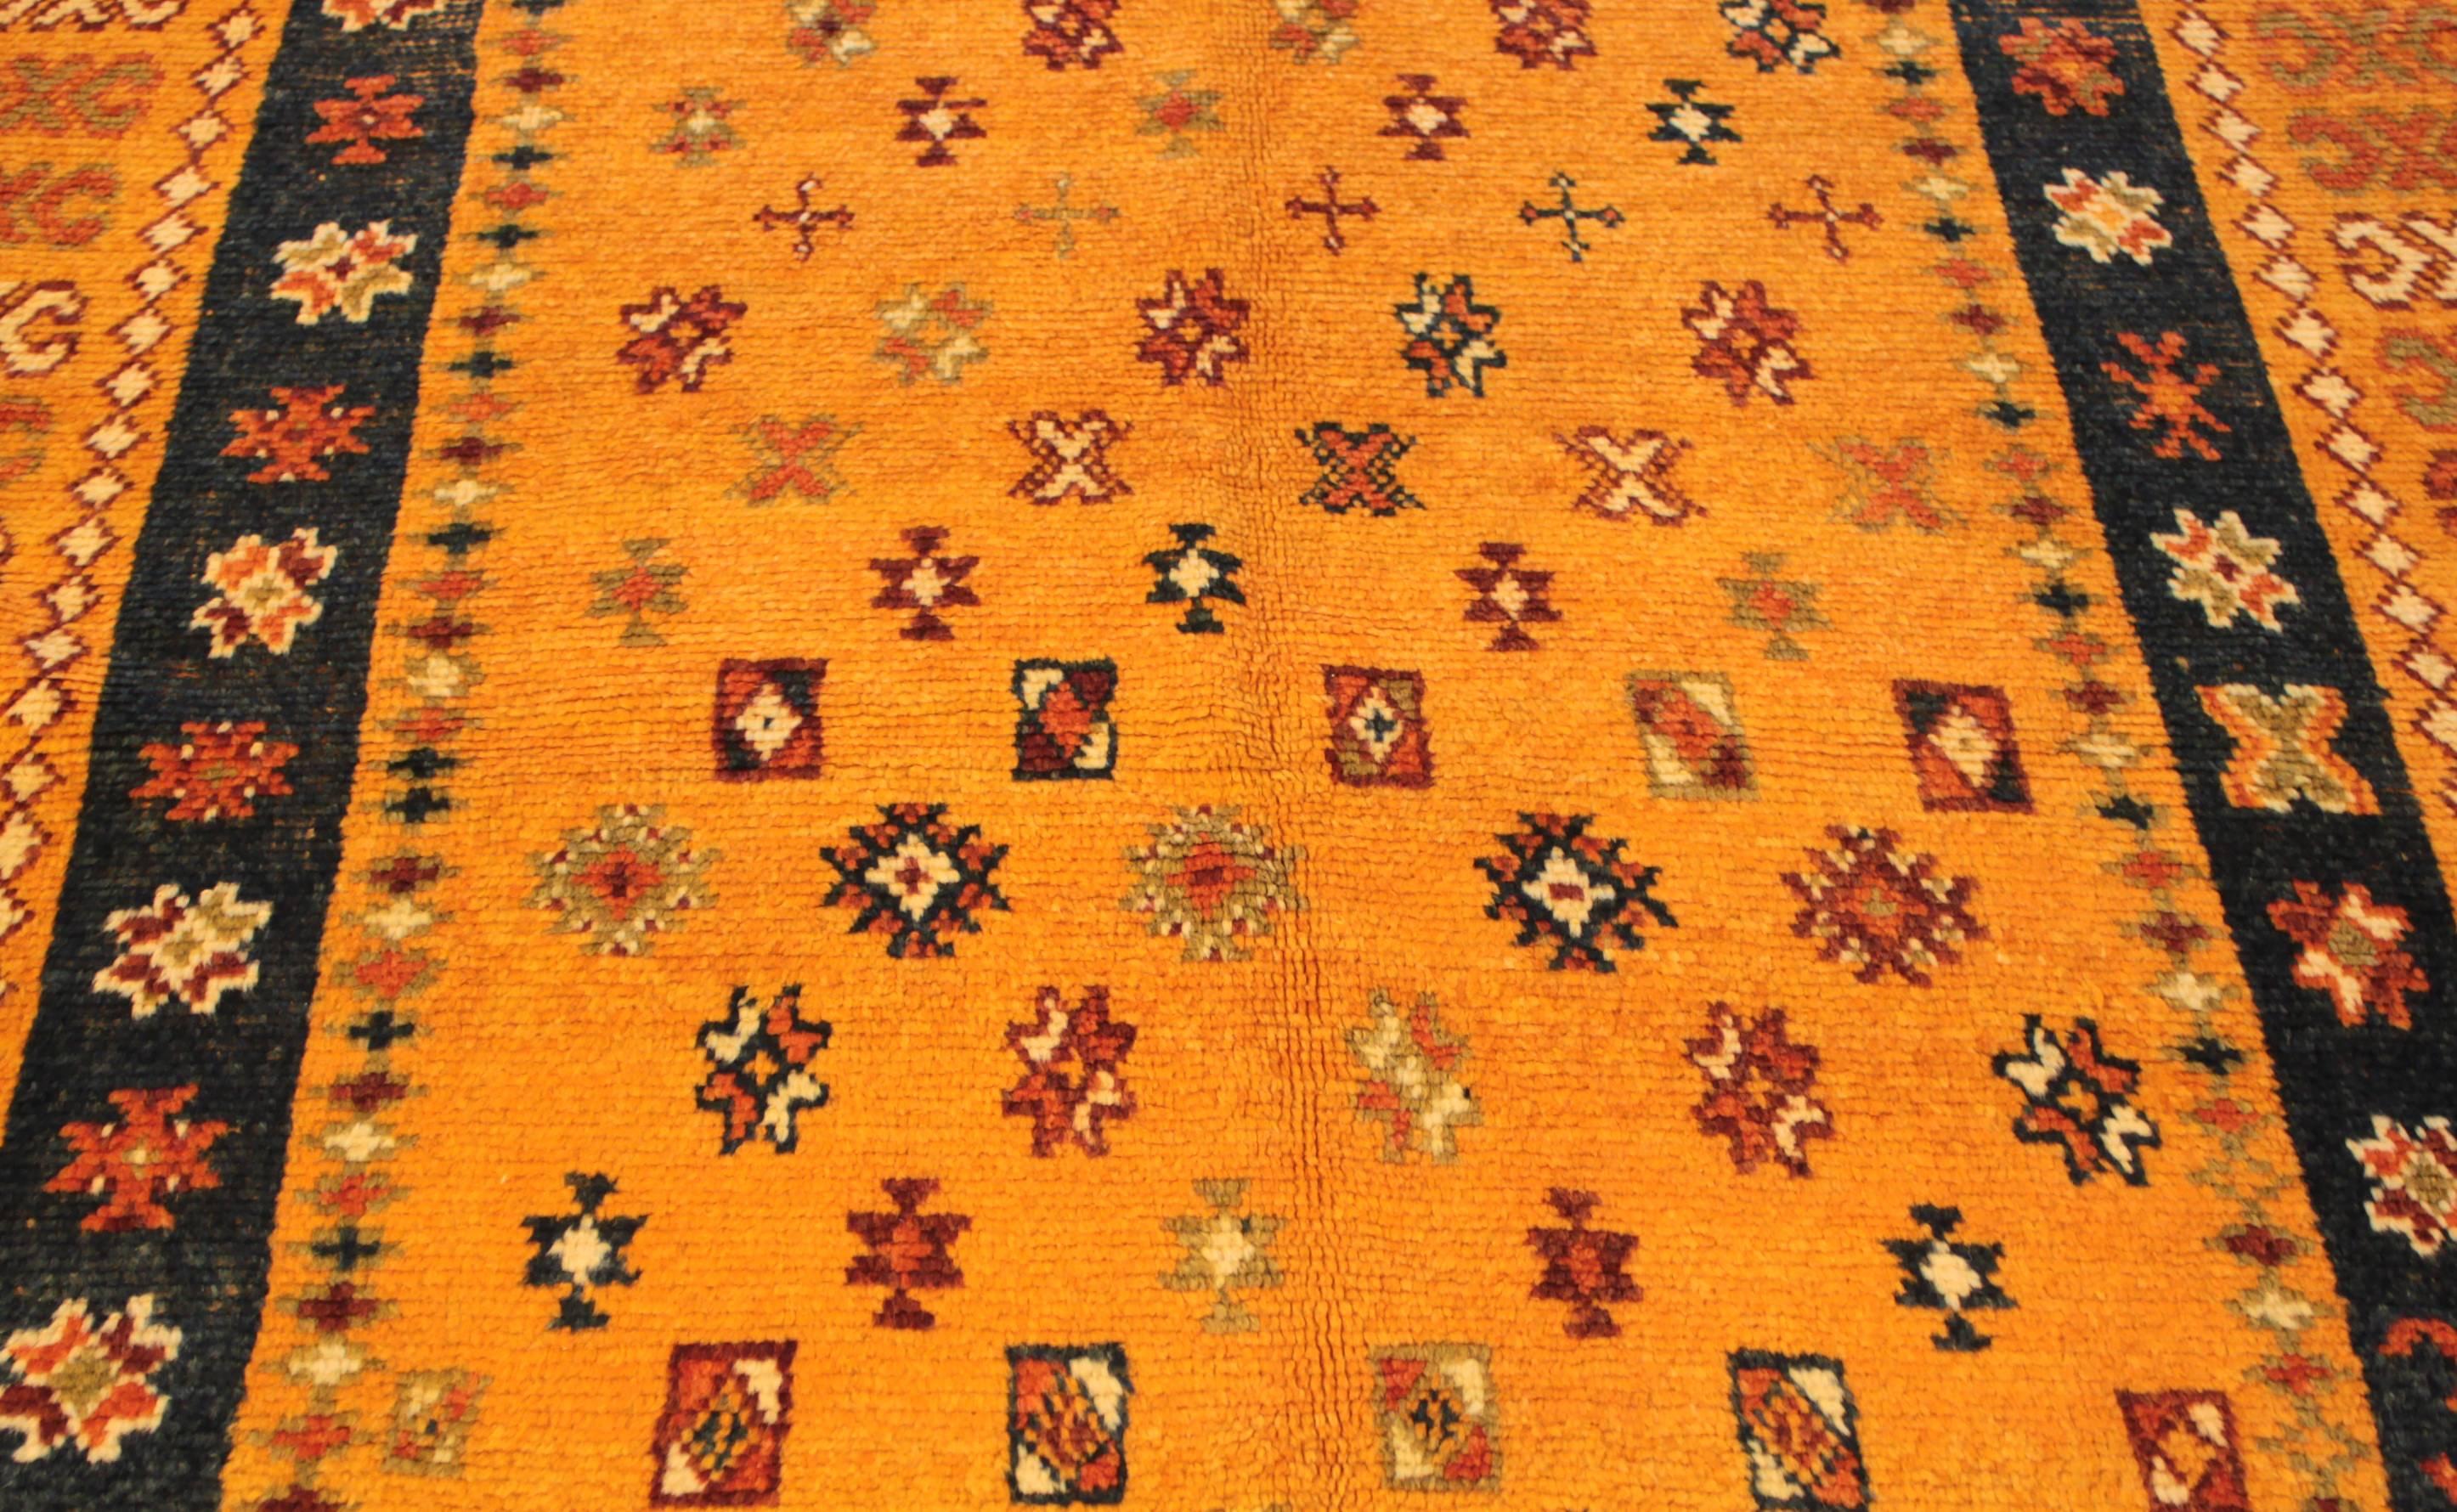 Mid 20th Century Vintage Moroccan Wool Rug In Excellent Condition For Sale In Norwalk, CT